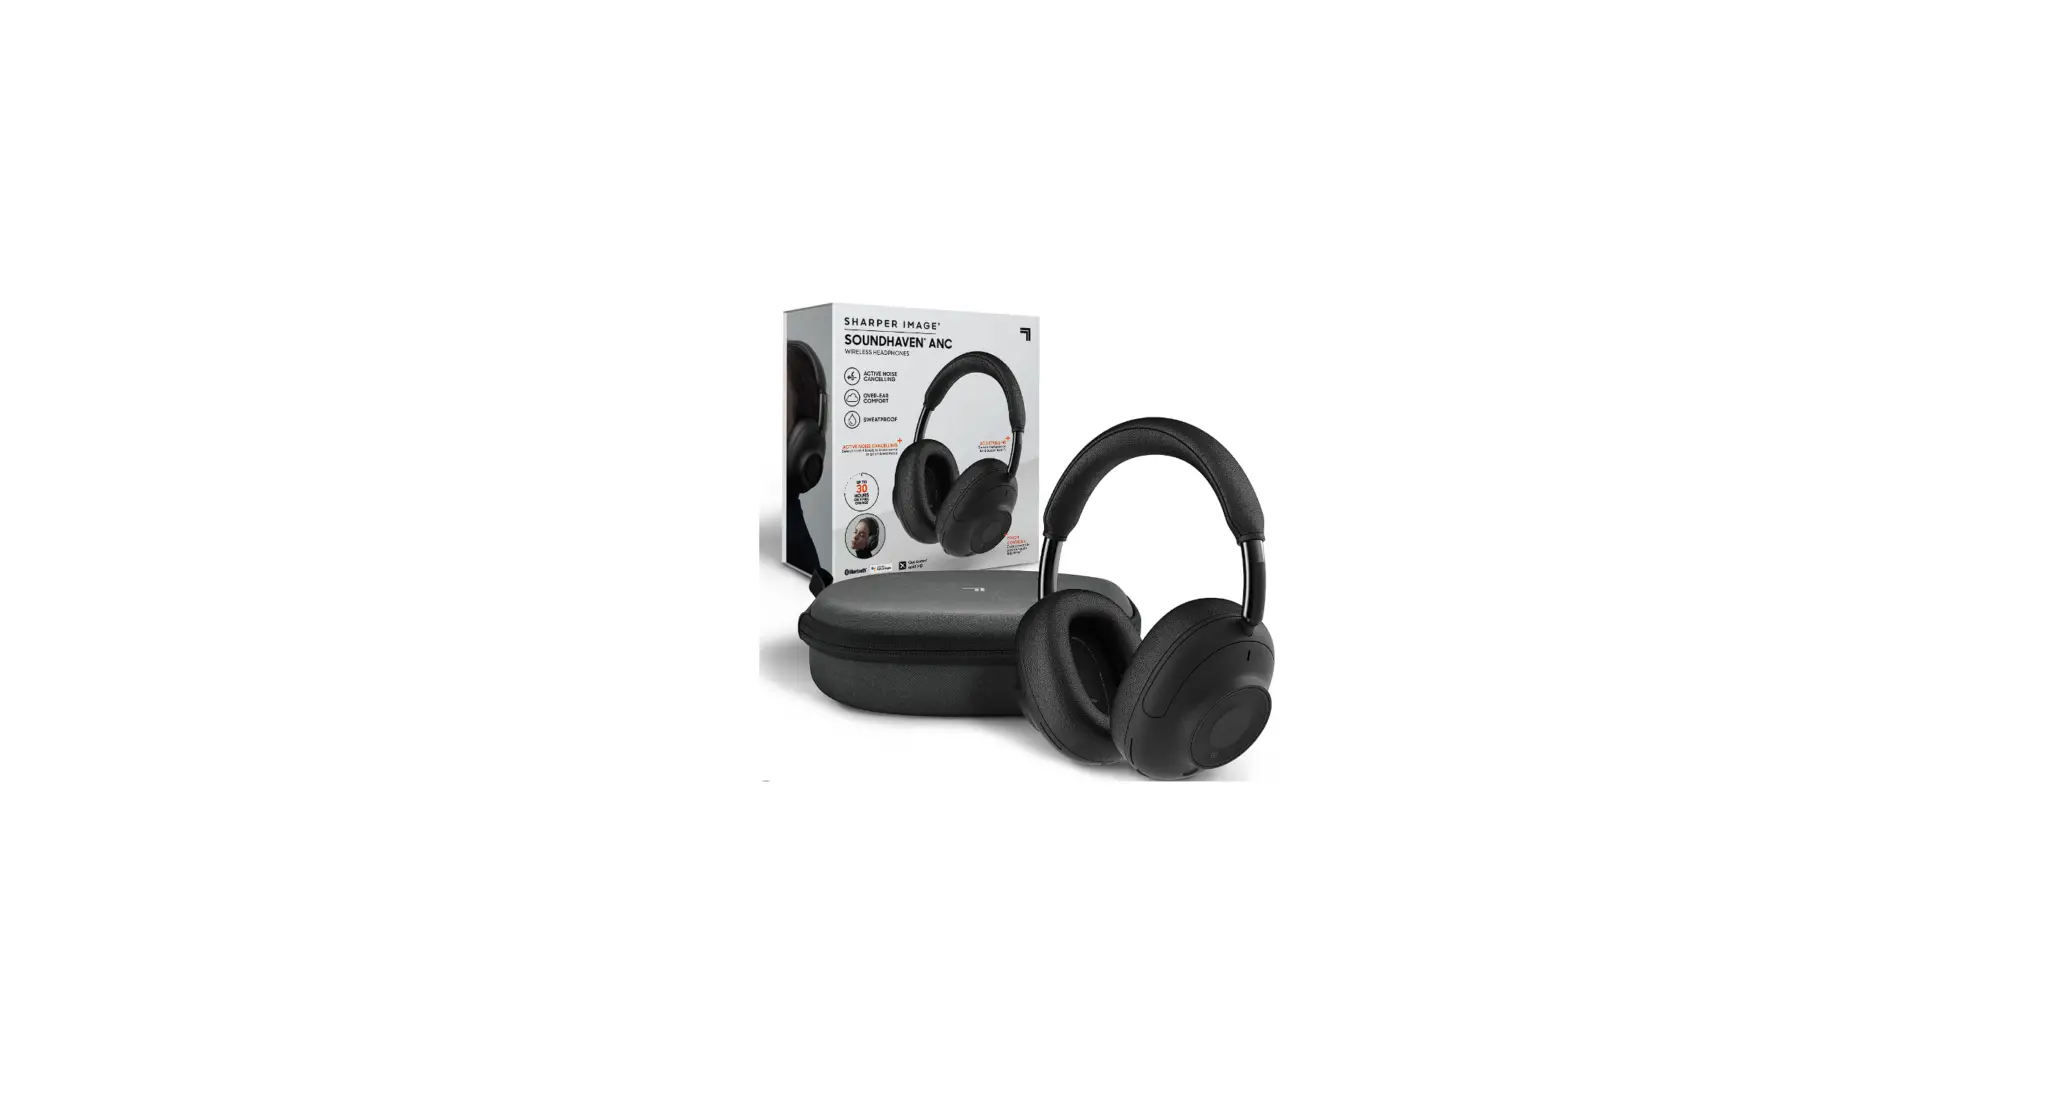 SOUNDHAVEN ANC Wireless Over-Ear Bluetooth Headphones